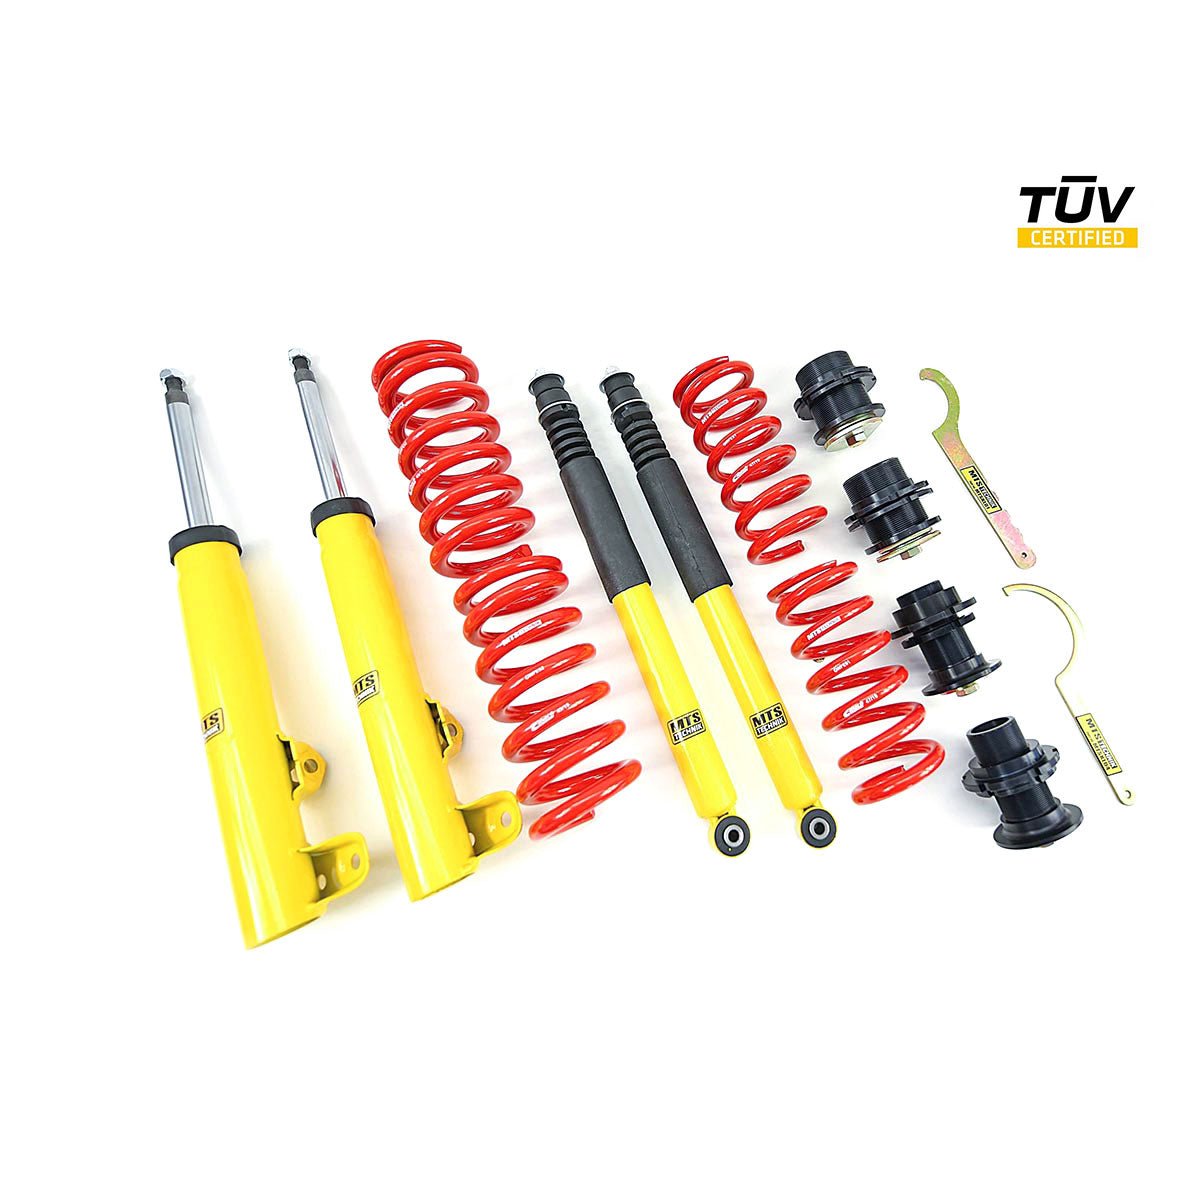 MTS TECHNIK coilover kit STREET Mercedes-Benz C124 (with TÜV) - PARTS33 GmbH